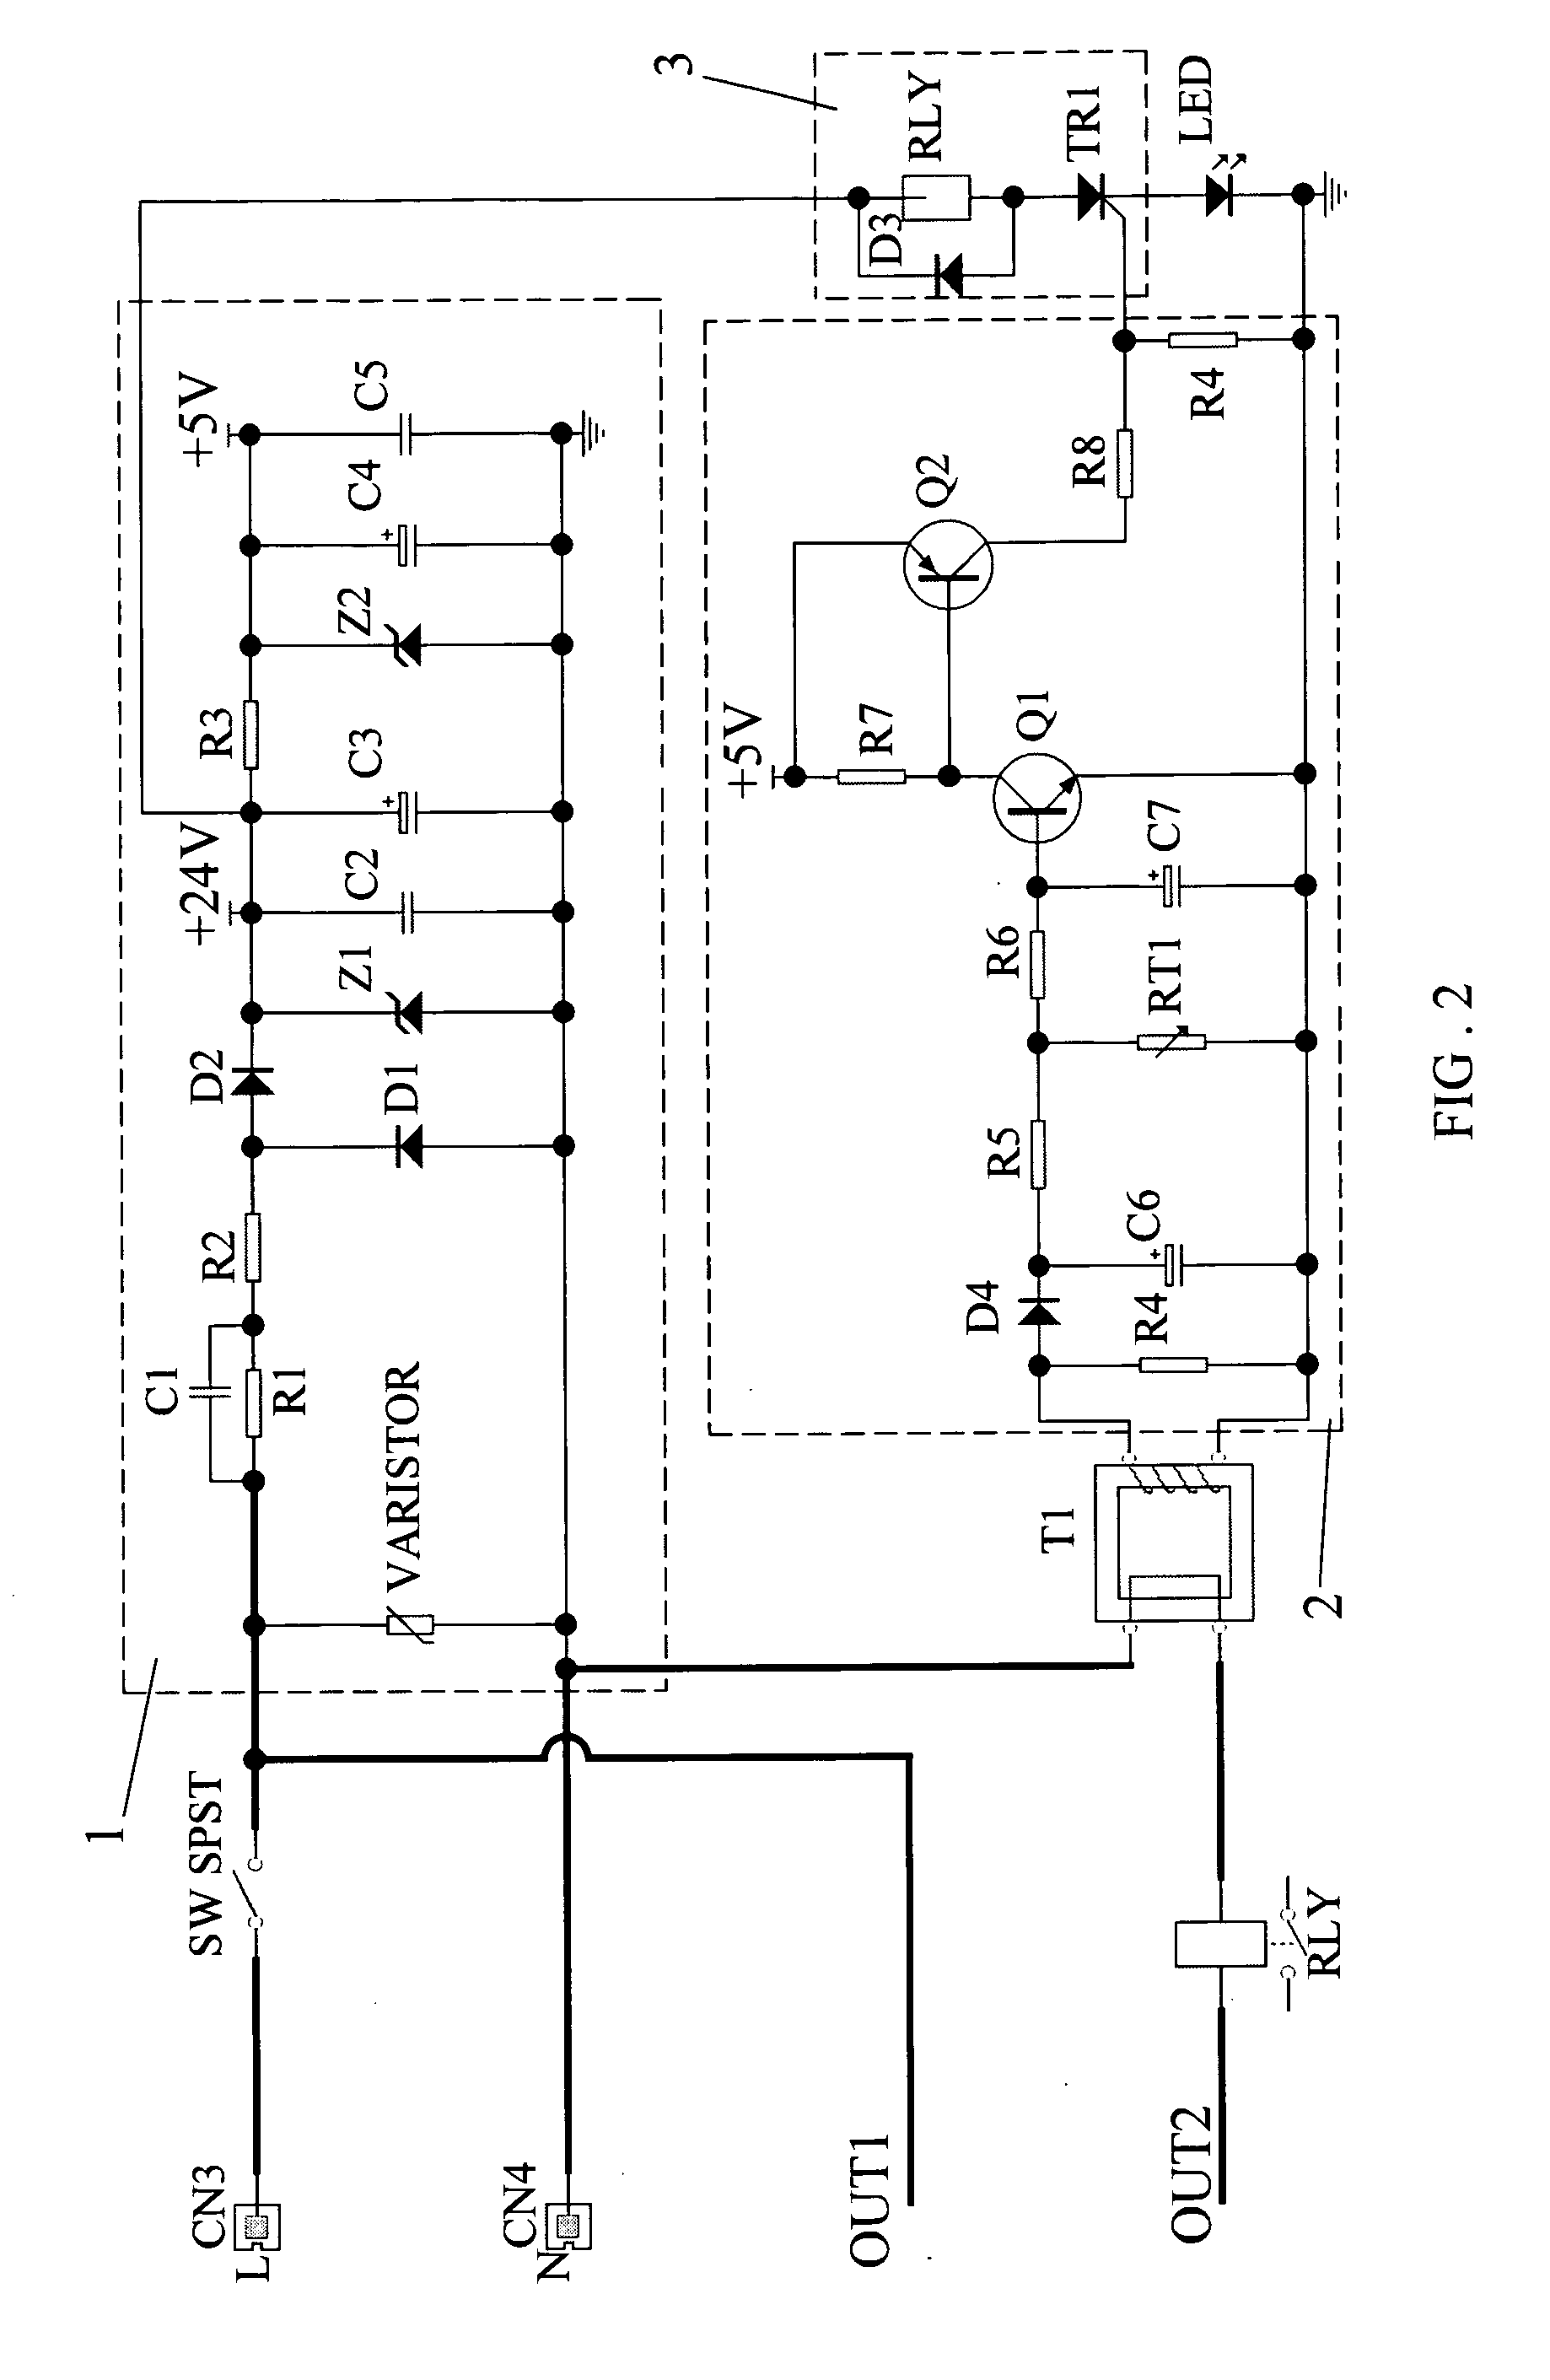 Light-adjusting and current-limiting control circuit